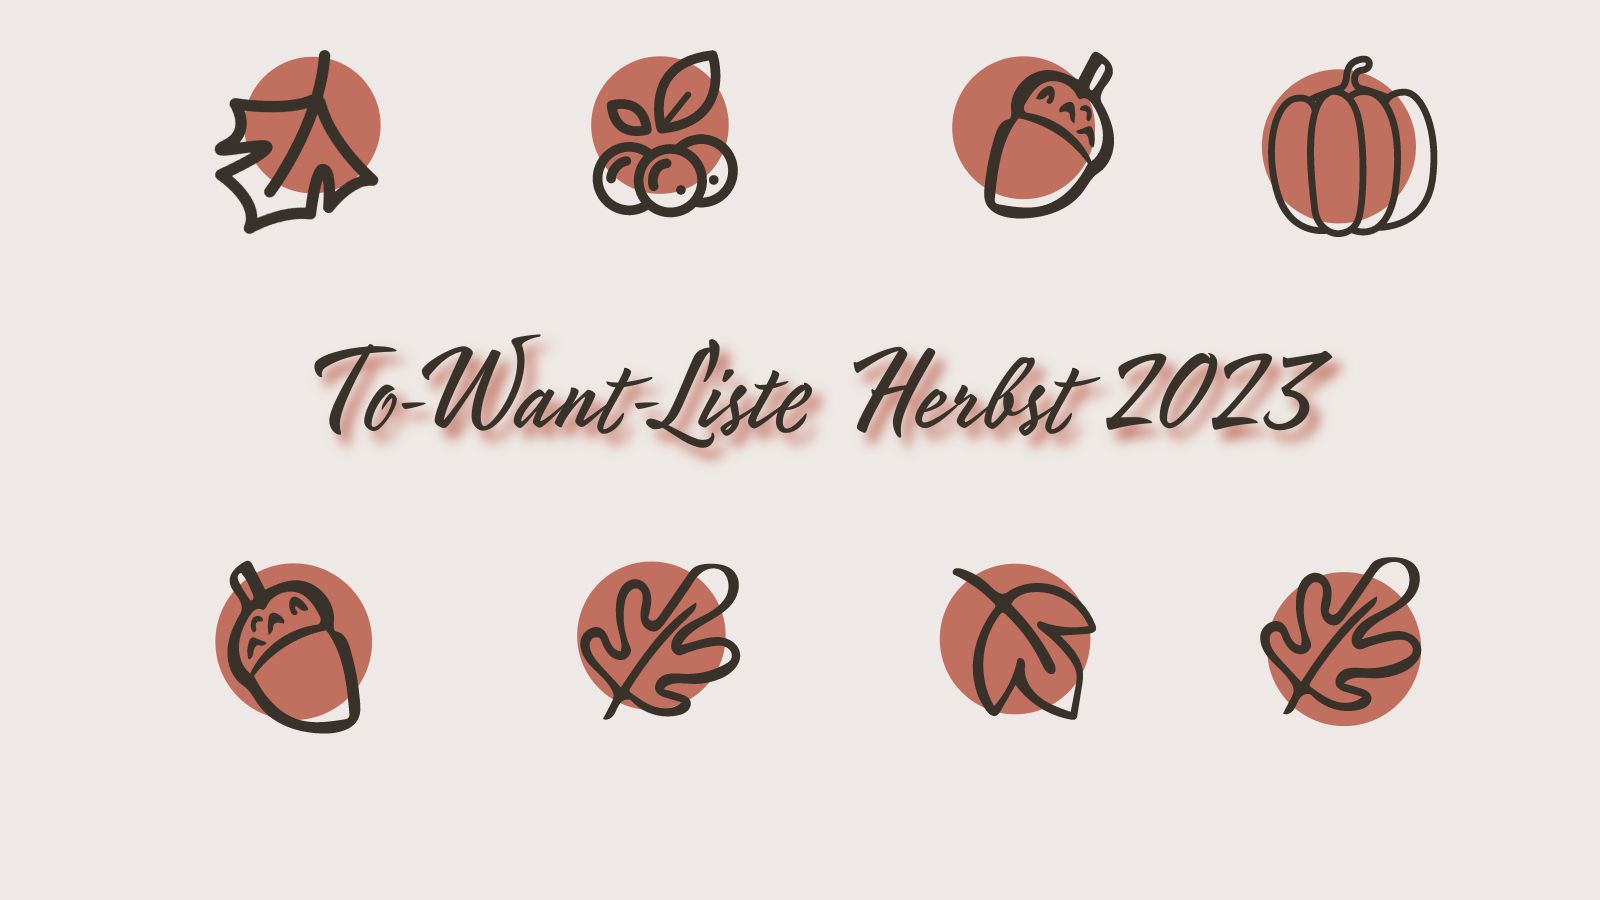 herbstliche Icons mit Text "To-Want-Liste Herbst 2023"